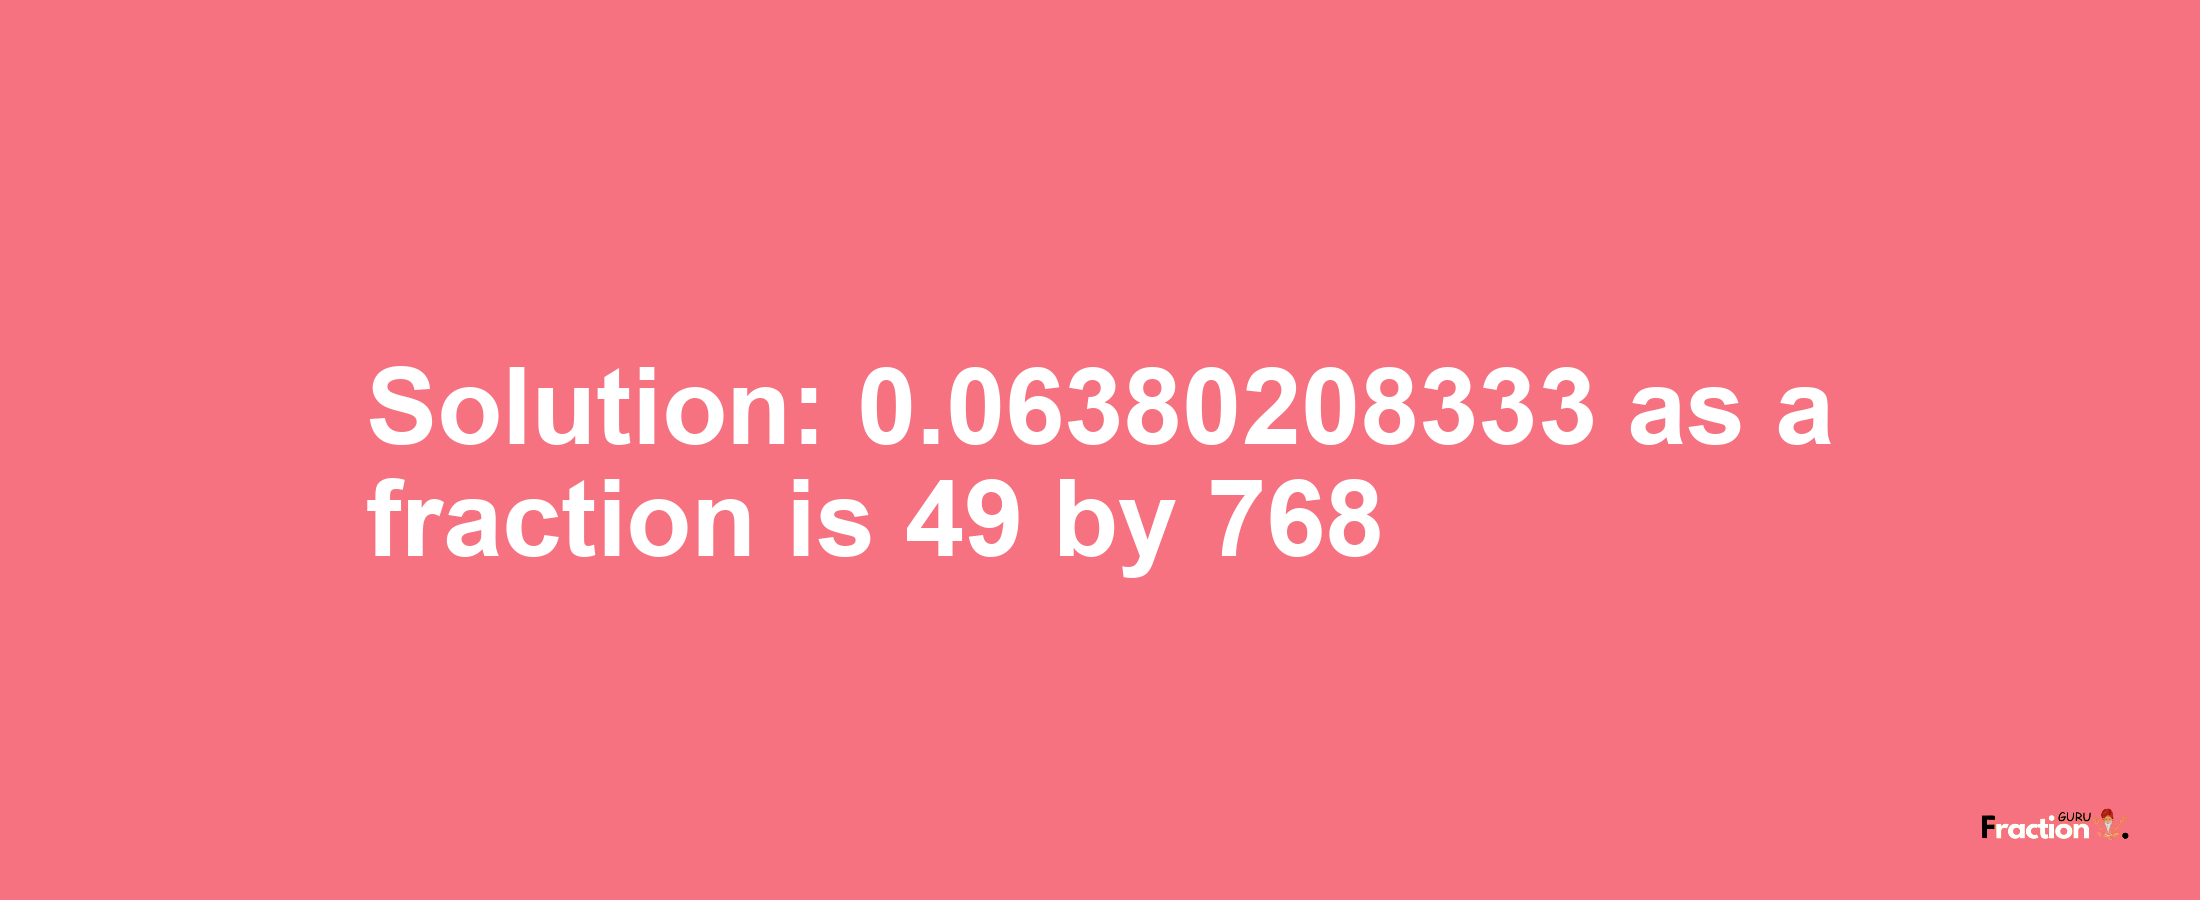 Solution:0.06380208333 as a fraction is 49/768